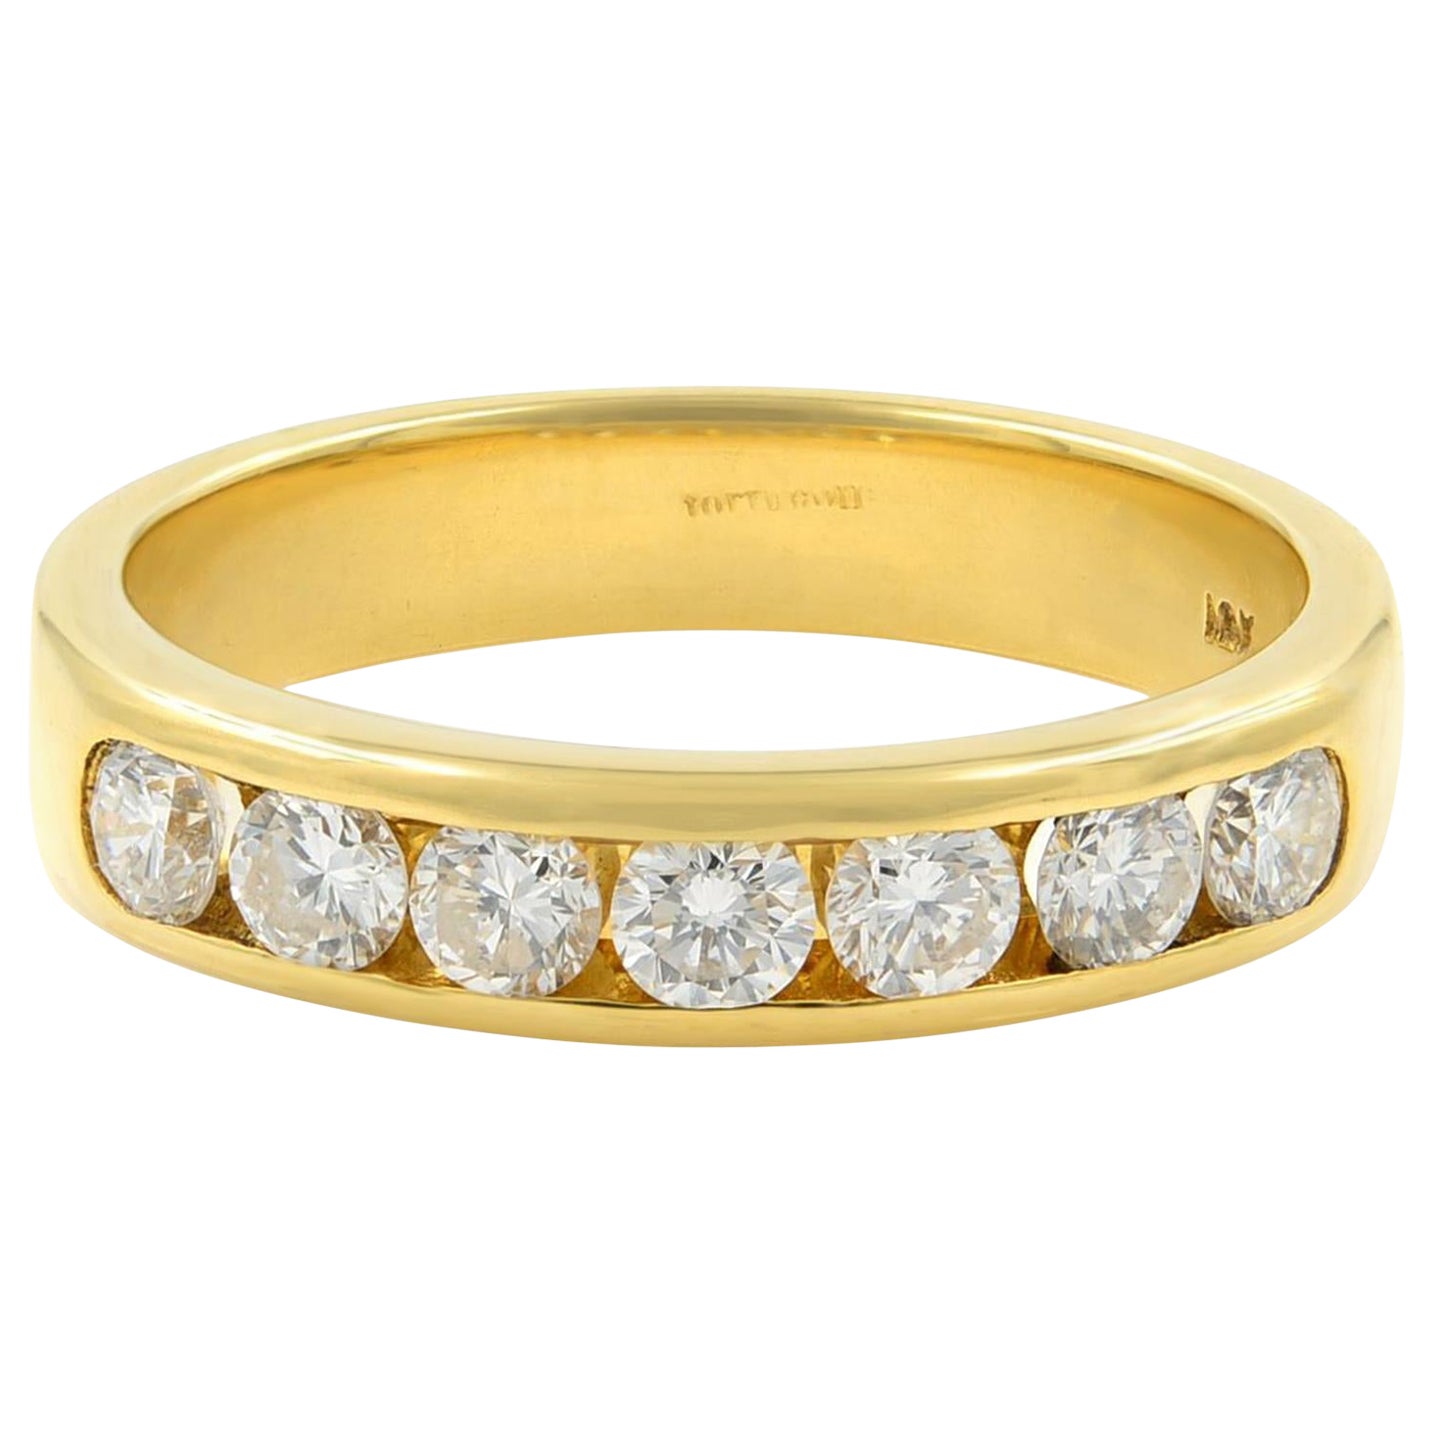 Channel Set Round Diamond Wedding Ring Band 18K Yellow Gold 0.50Cttw For Sale